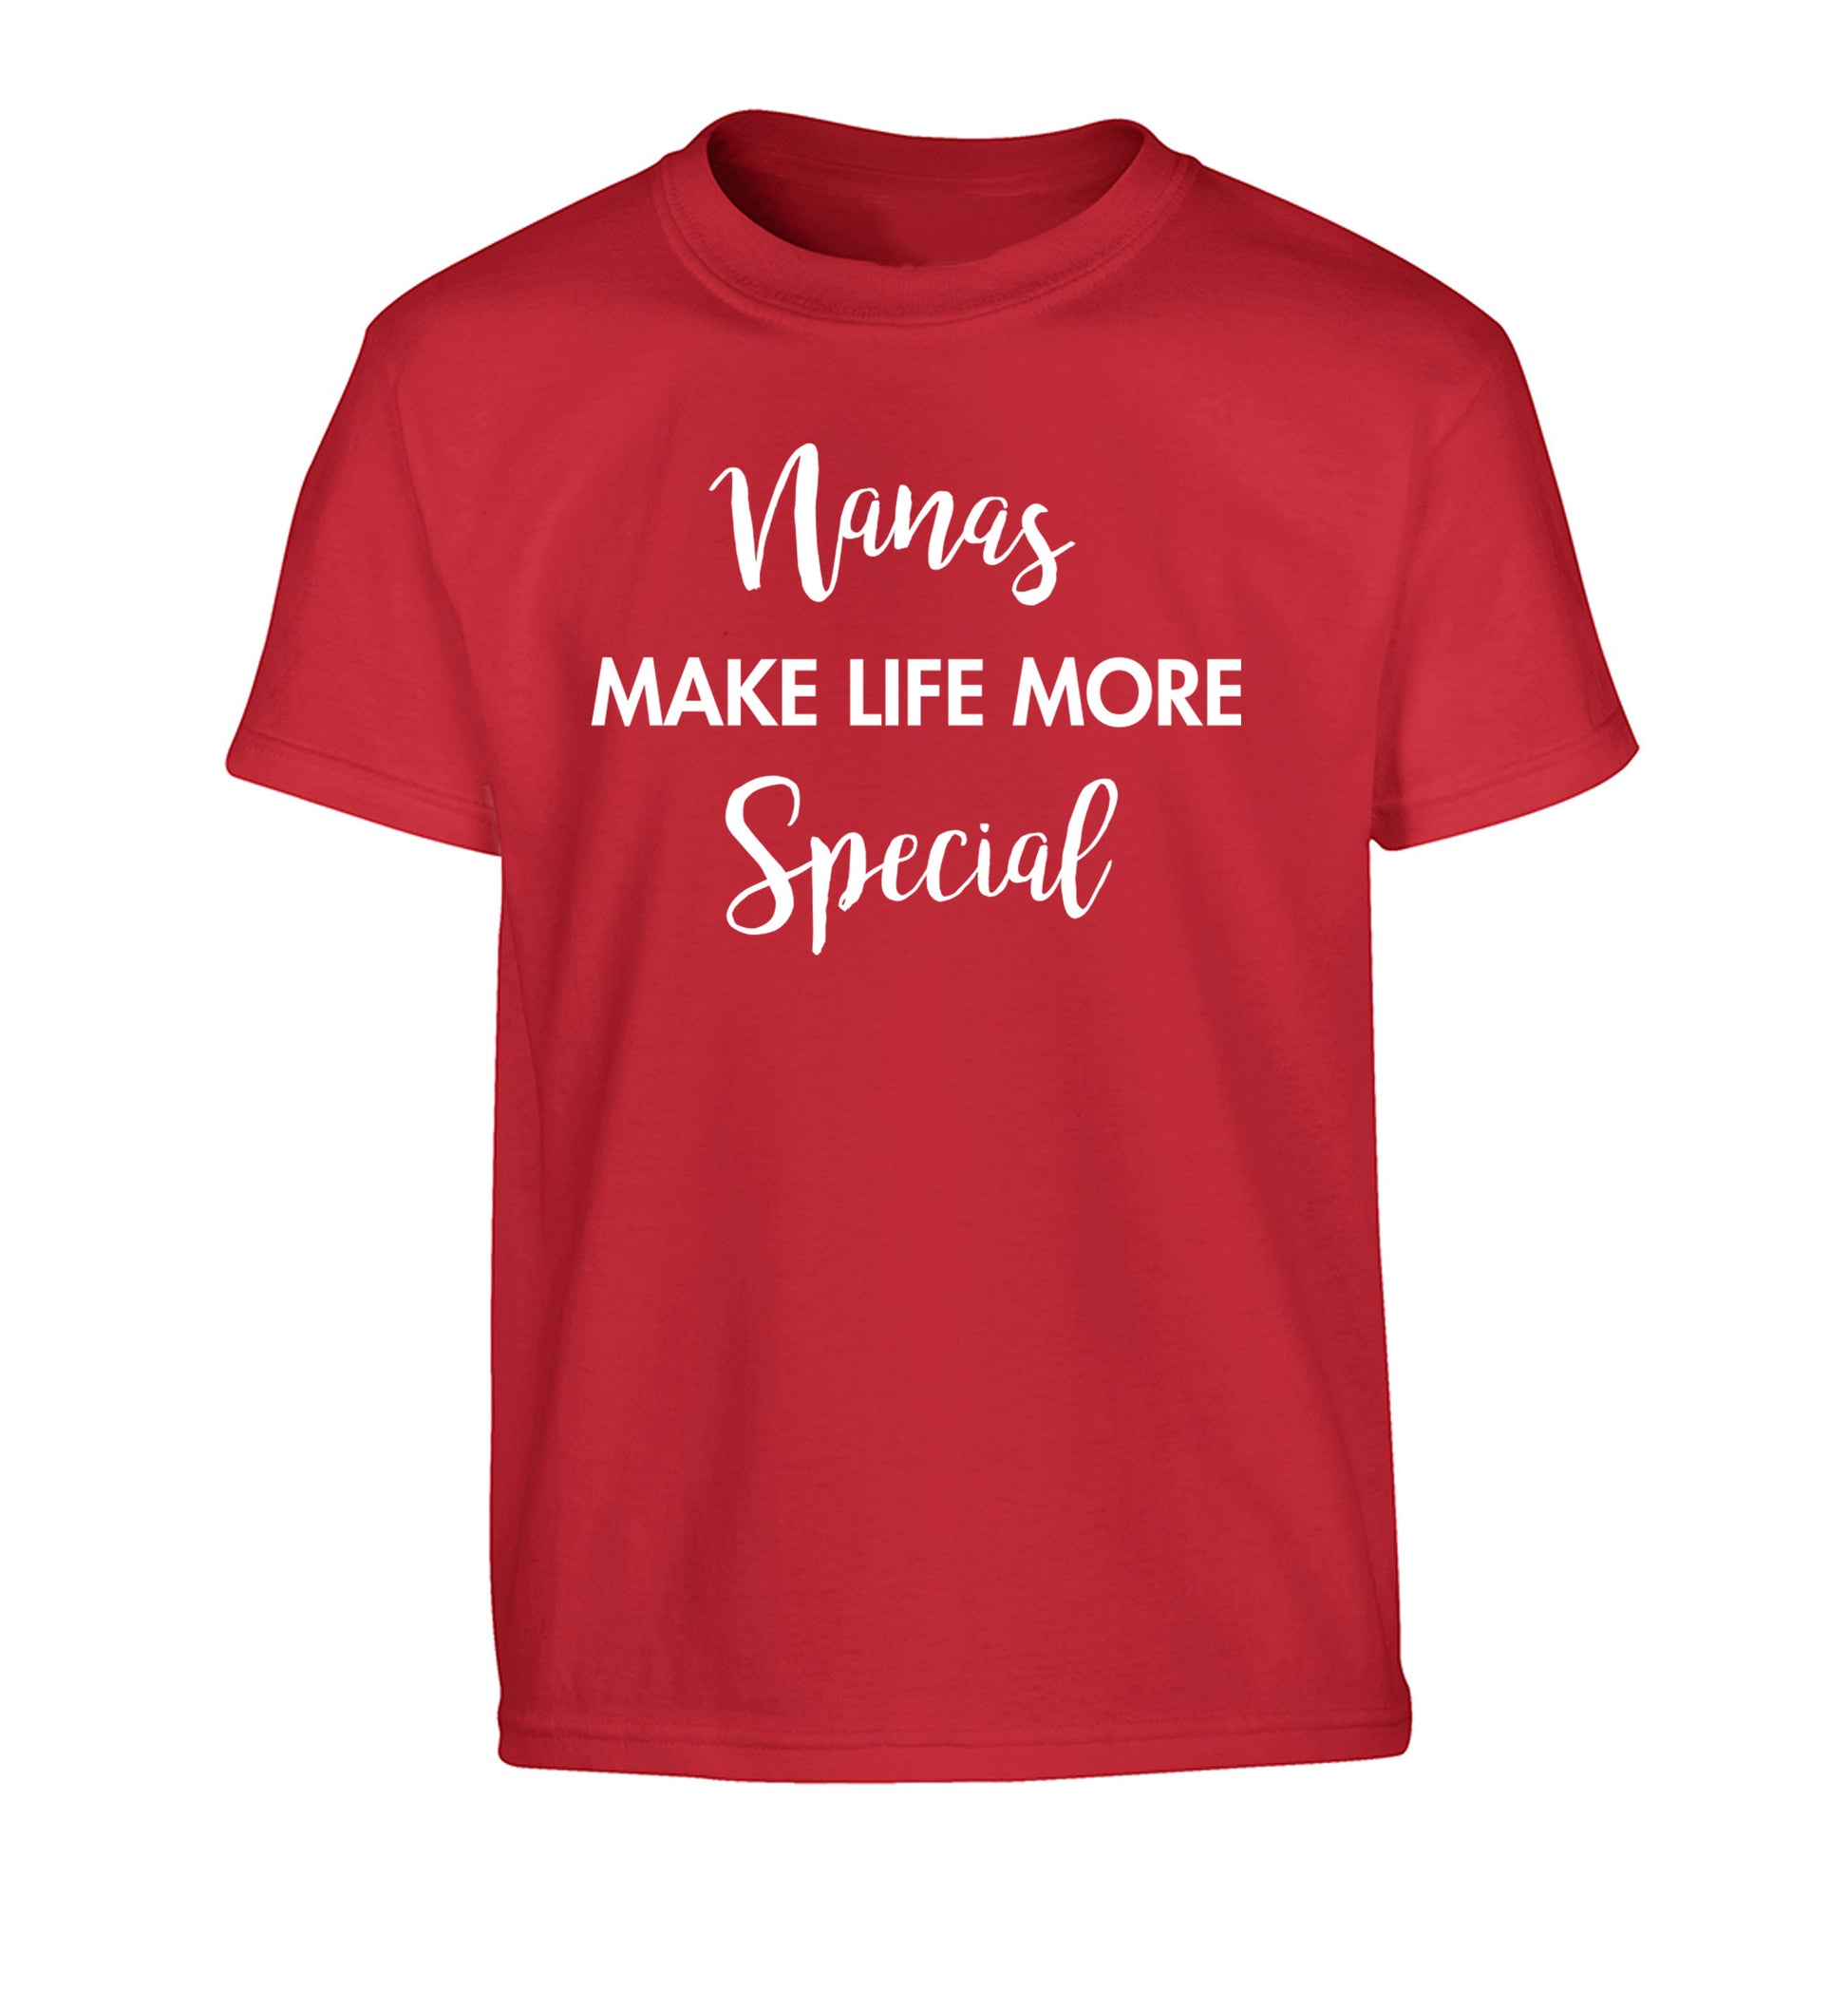 Nanas make life more special Children's red Tshirt 12-14 Years